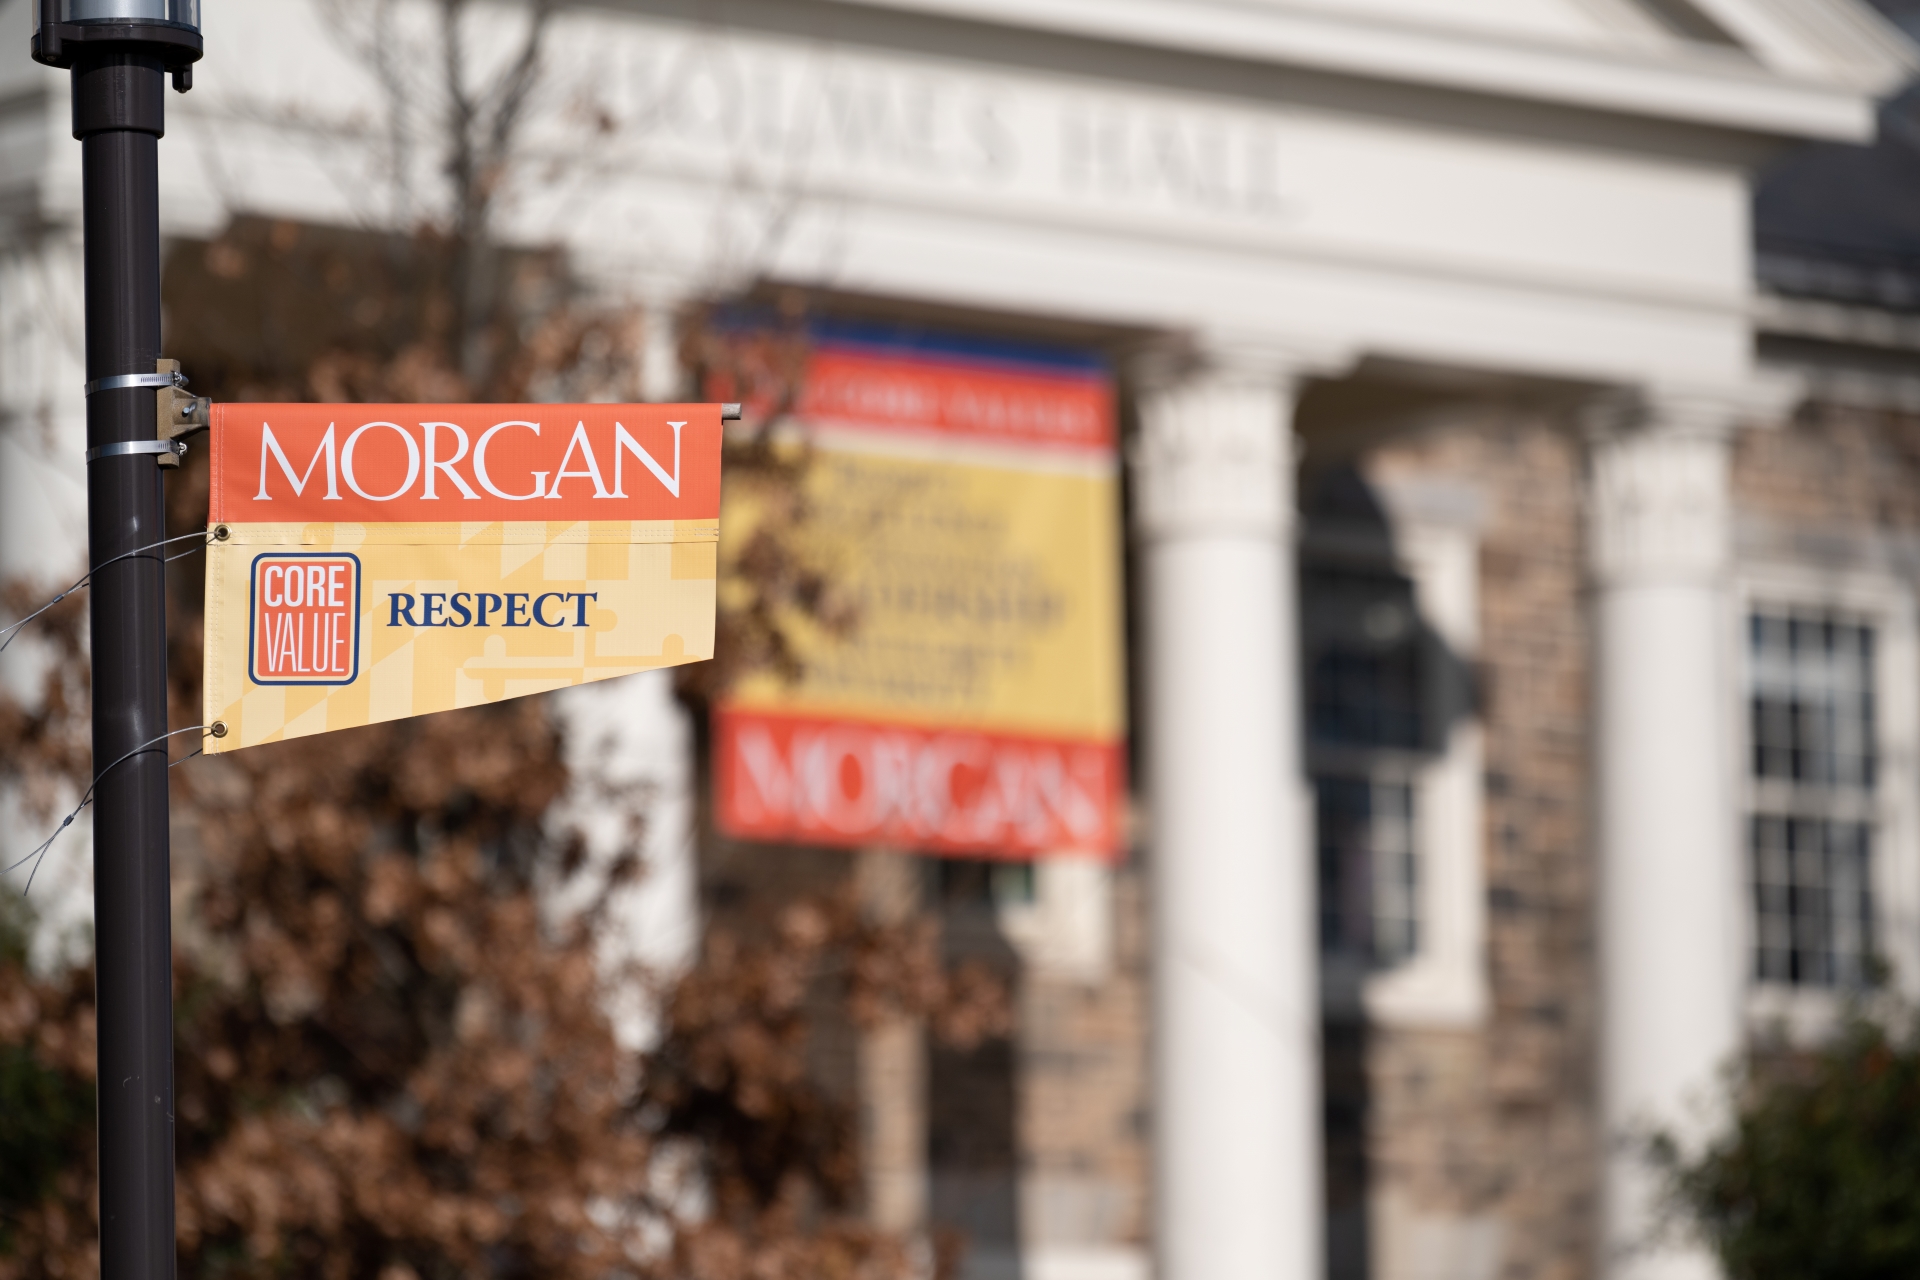 Morgan core value flag in front of Holmes Hall